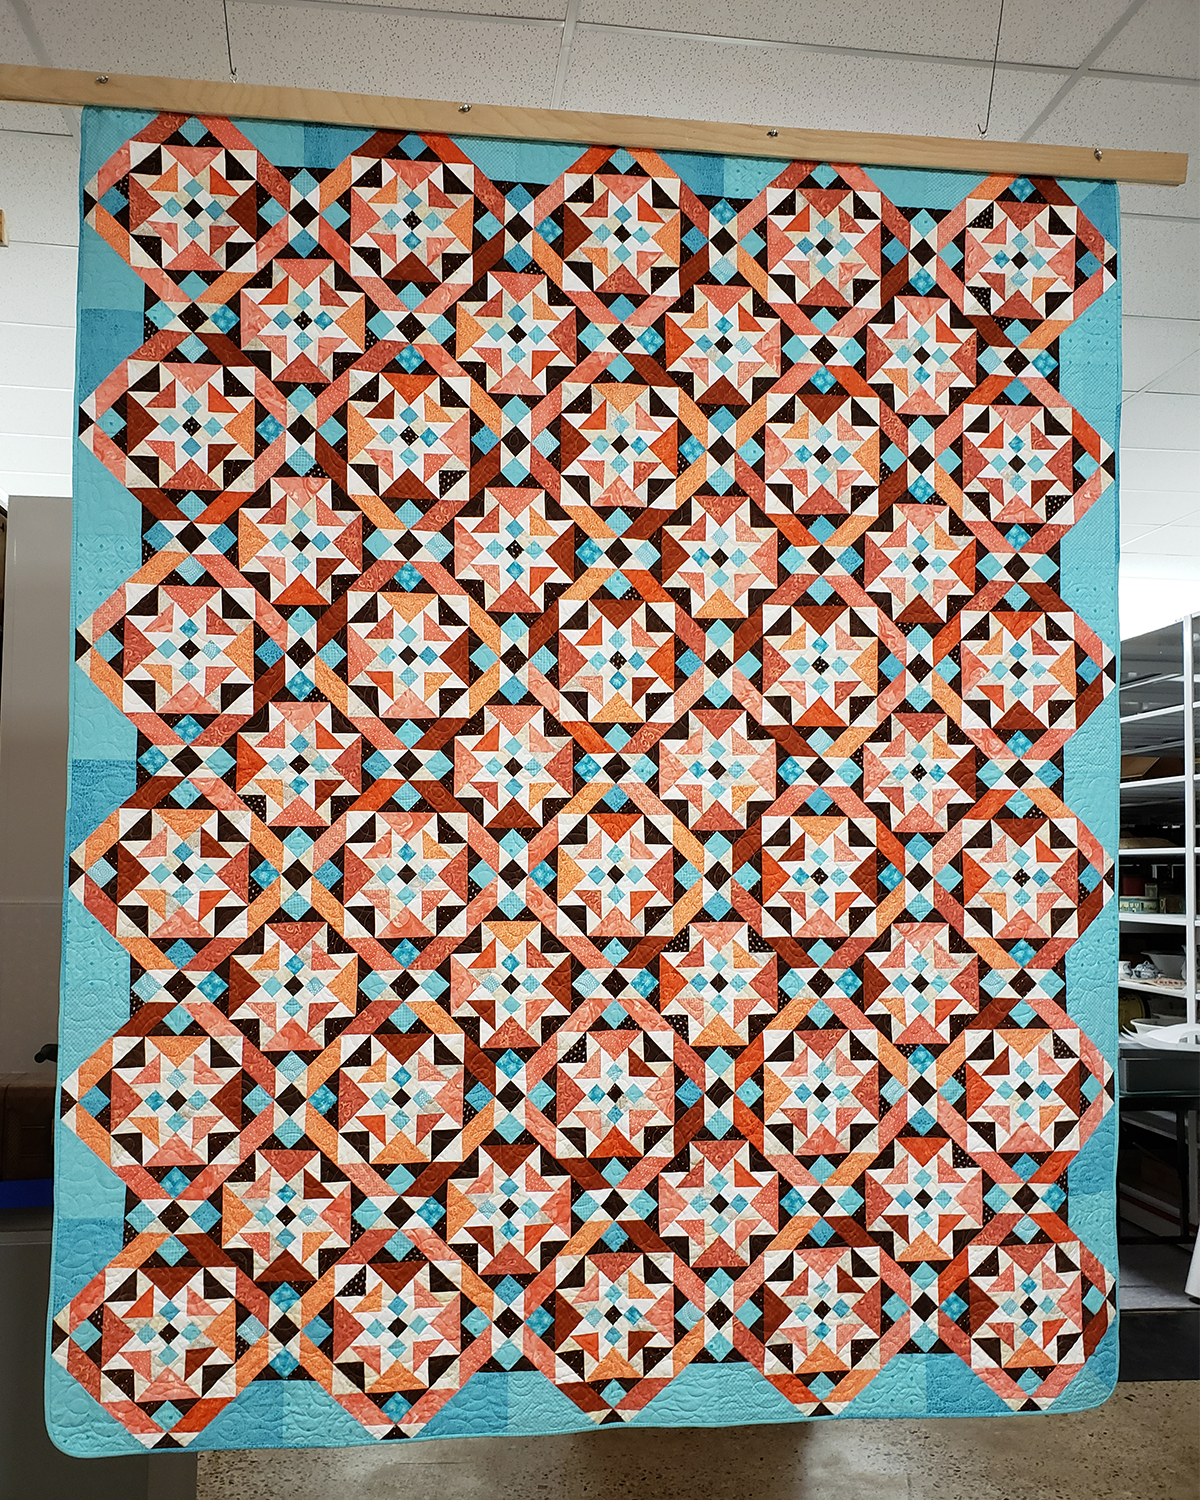 Quilt hanging on display